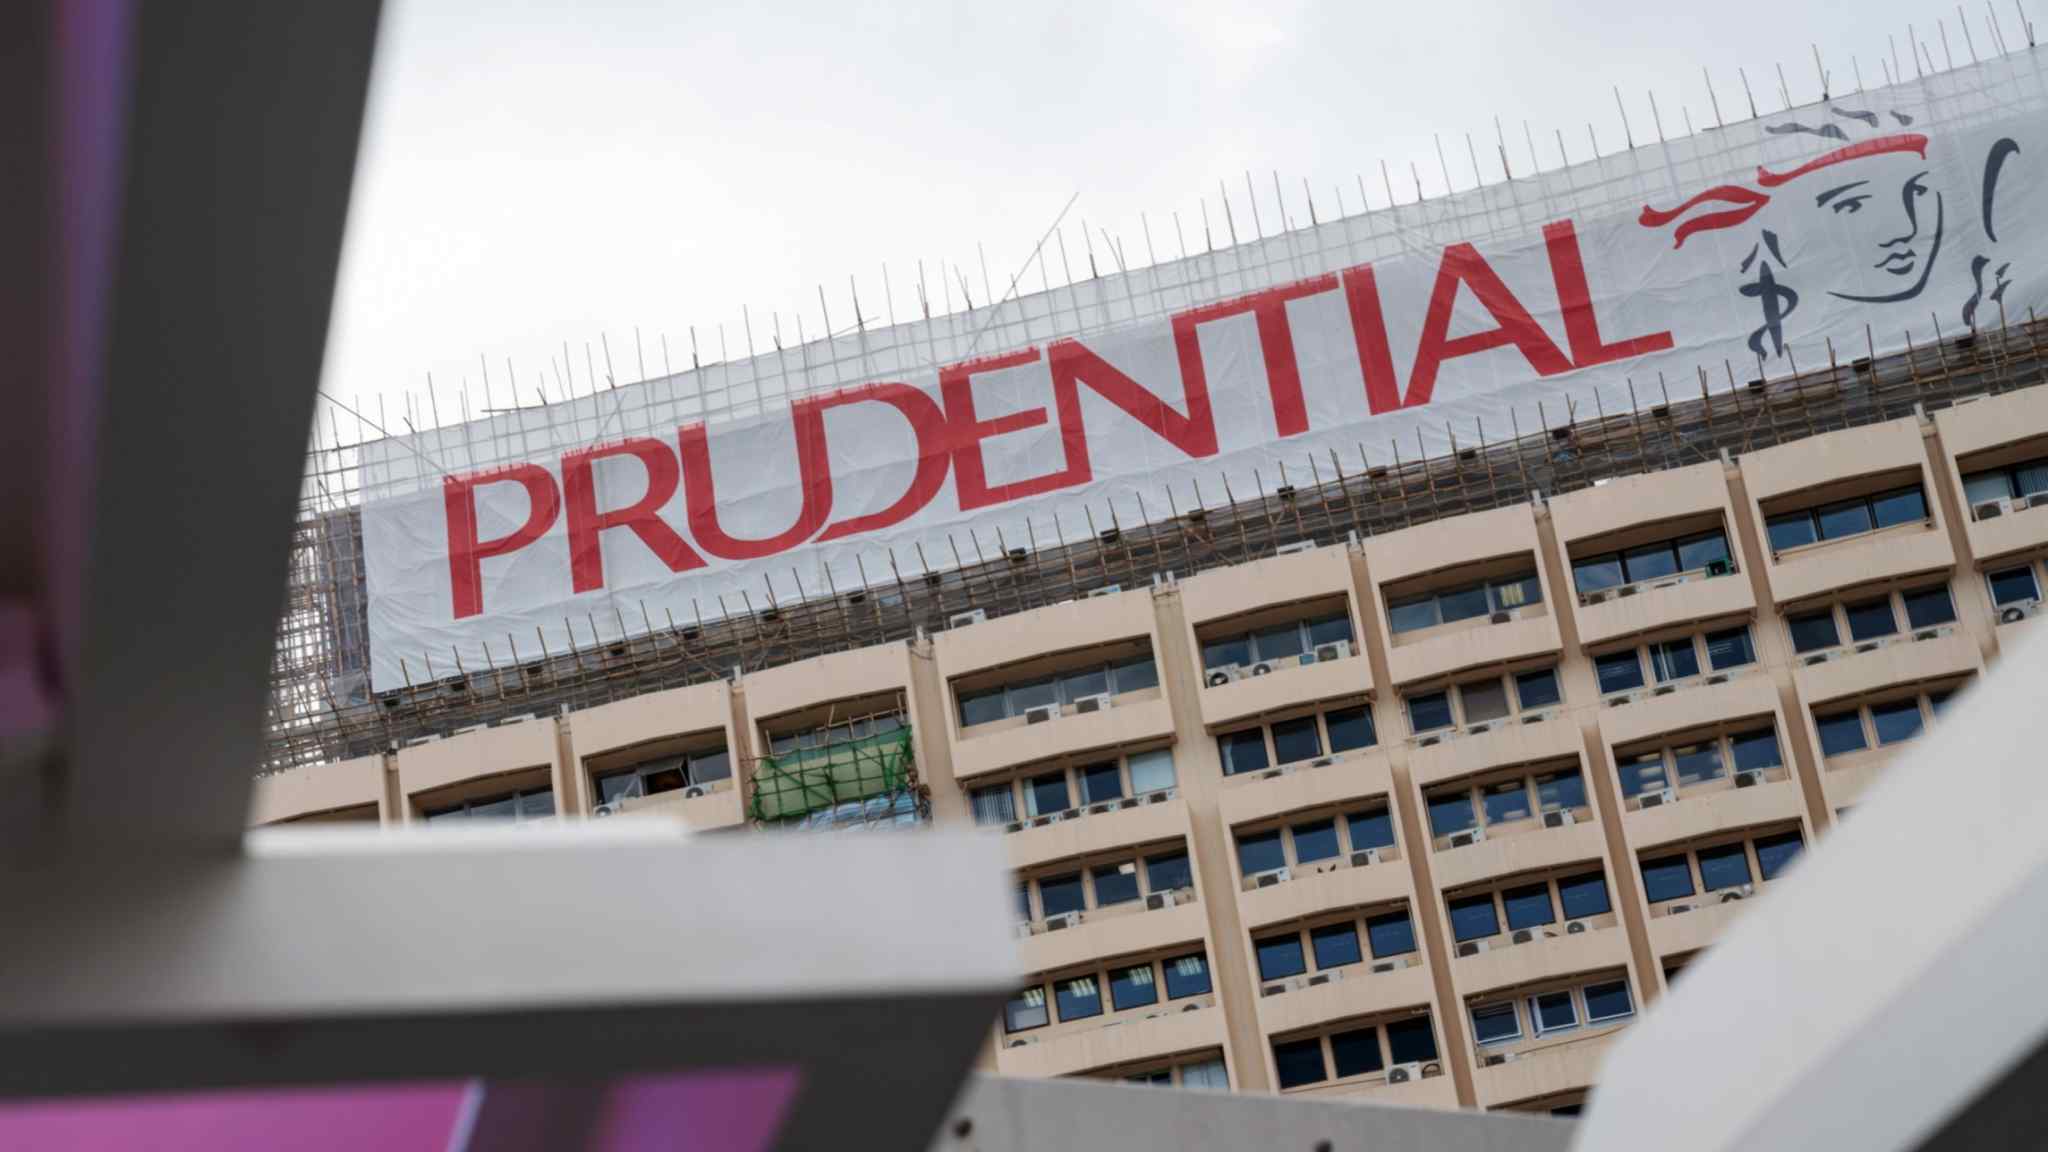 Prudential’s chief financial officer resigns after conduct probe